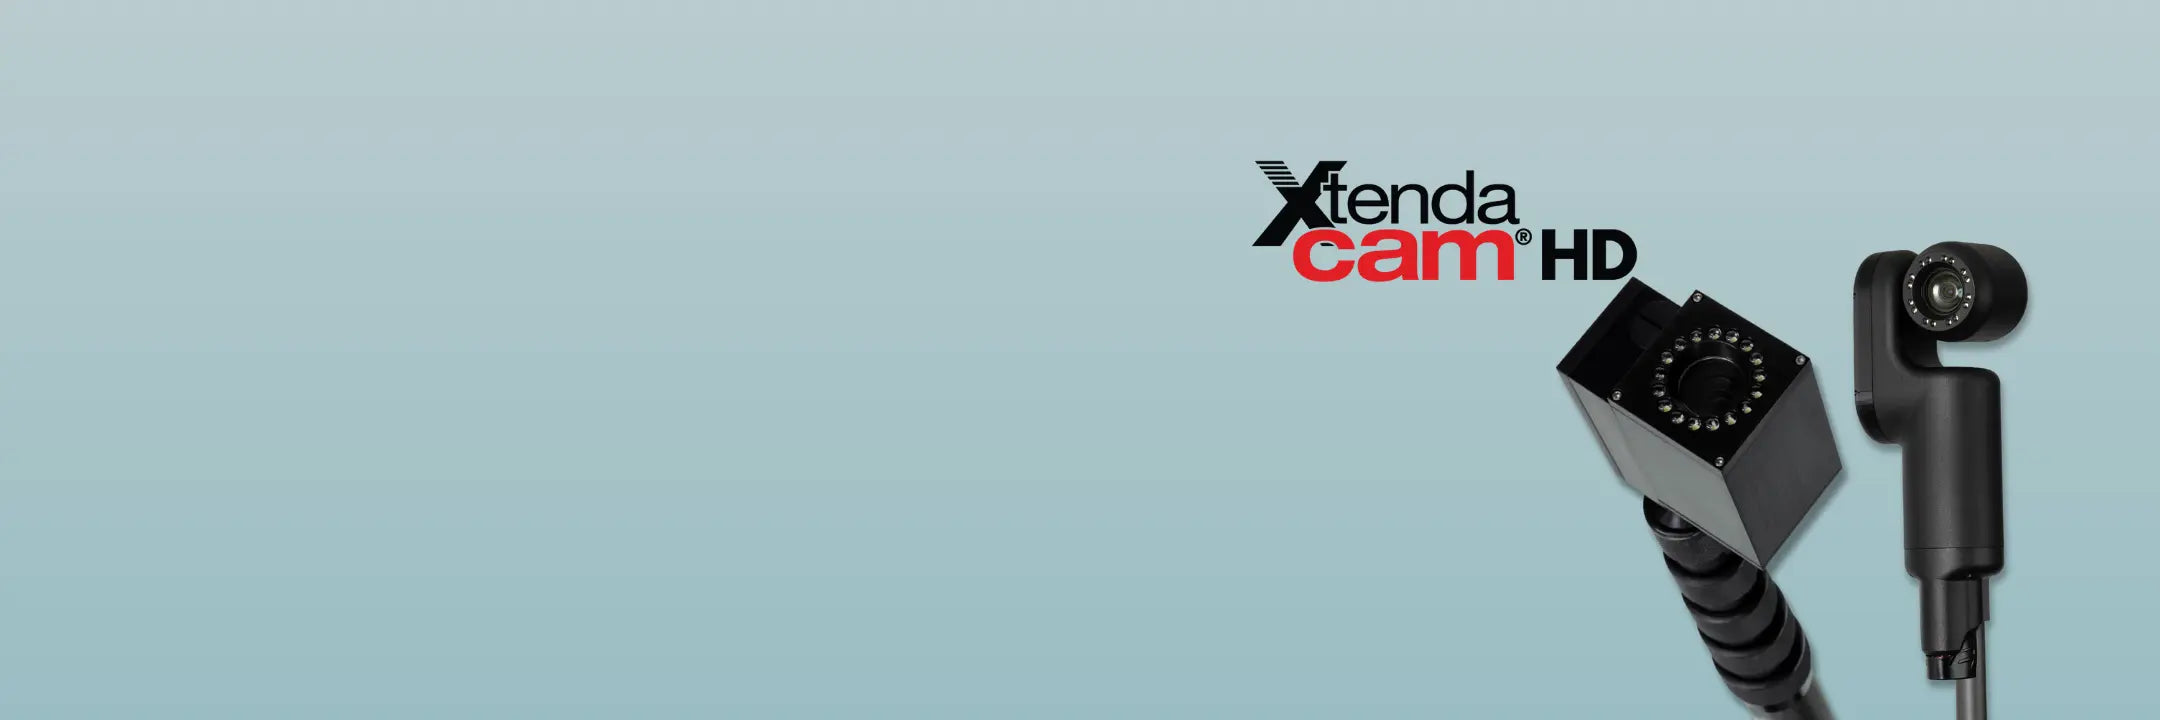 XtendaCam HD Air and Legacy Products- InterTest